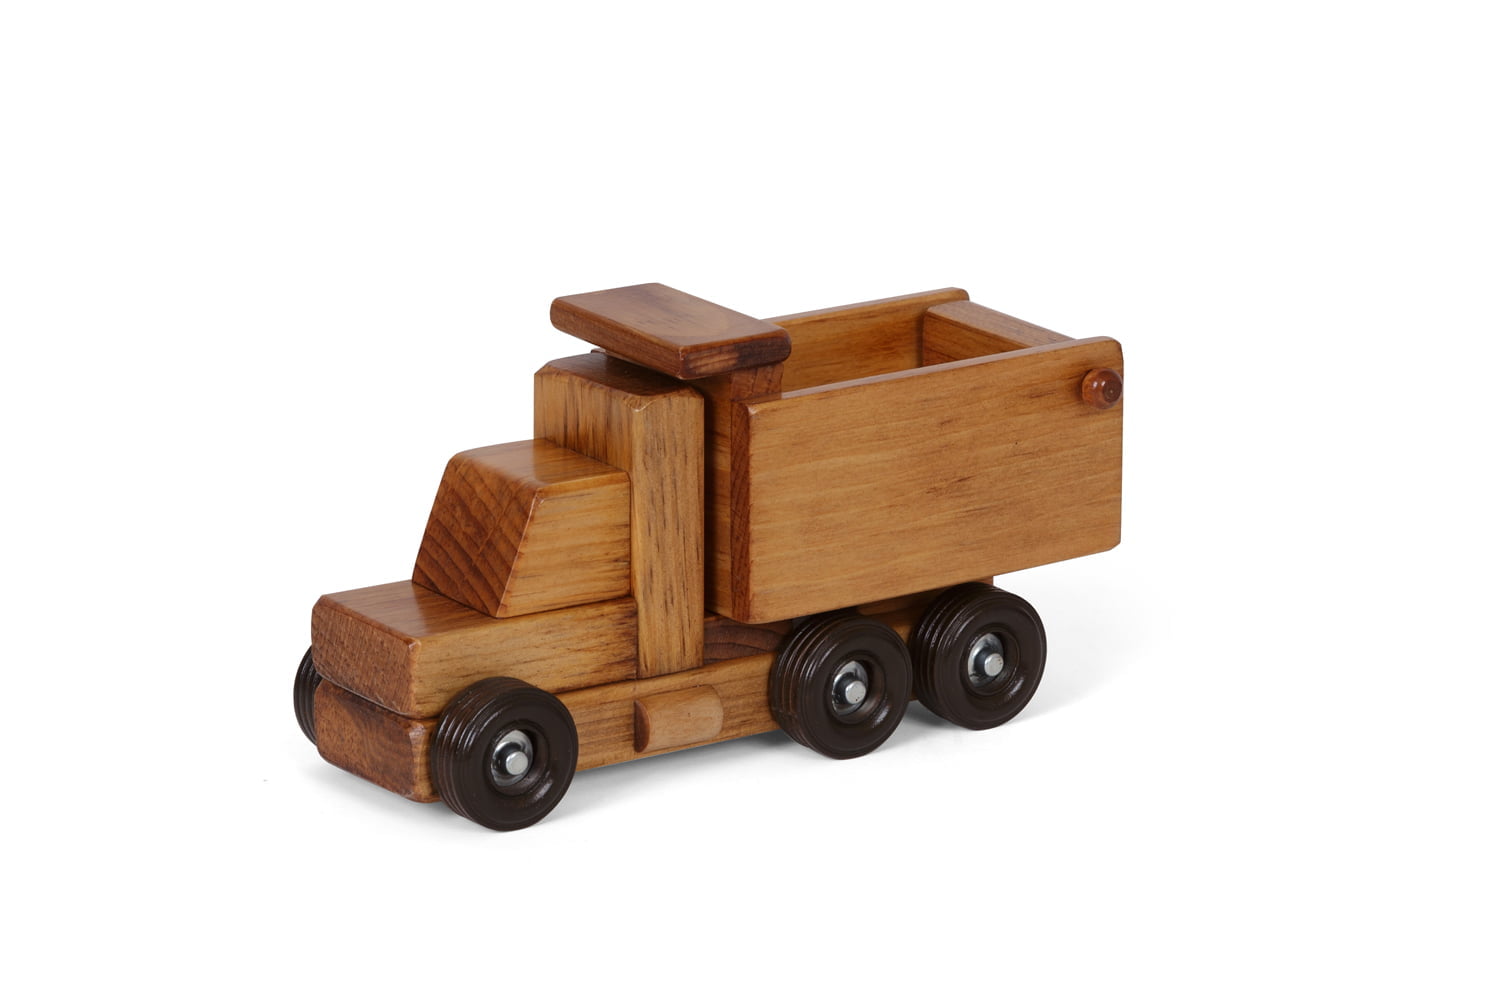 Wooden Working Dump Truck in Harvest Stain – Small